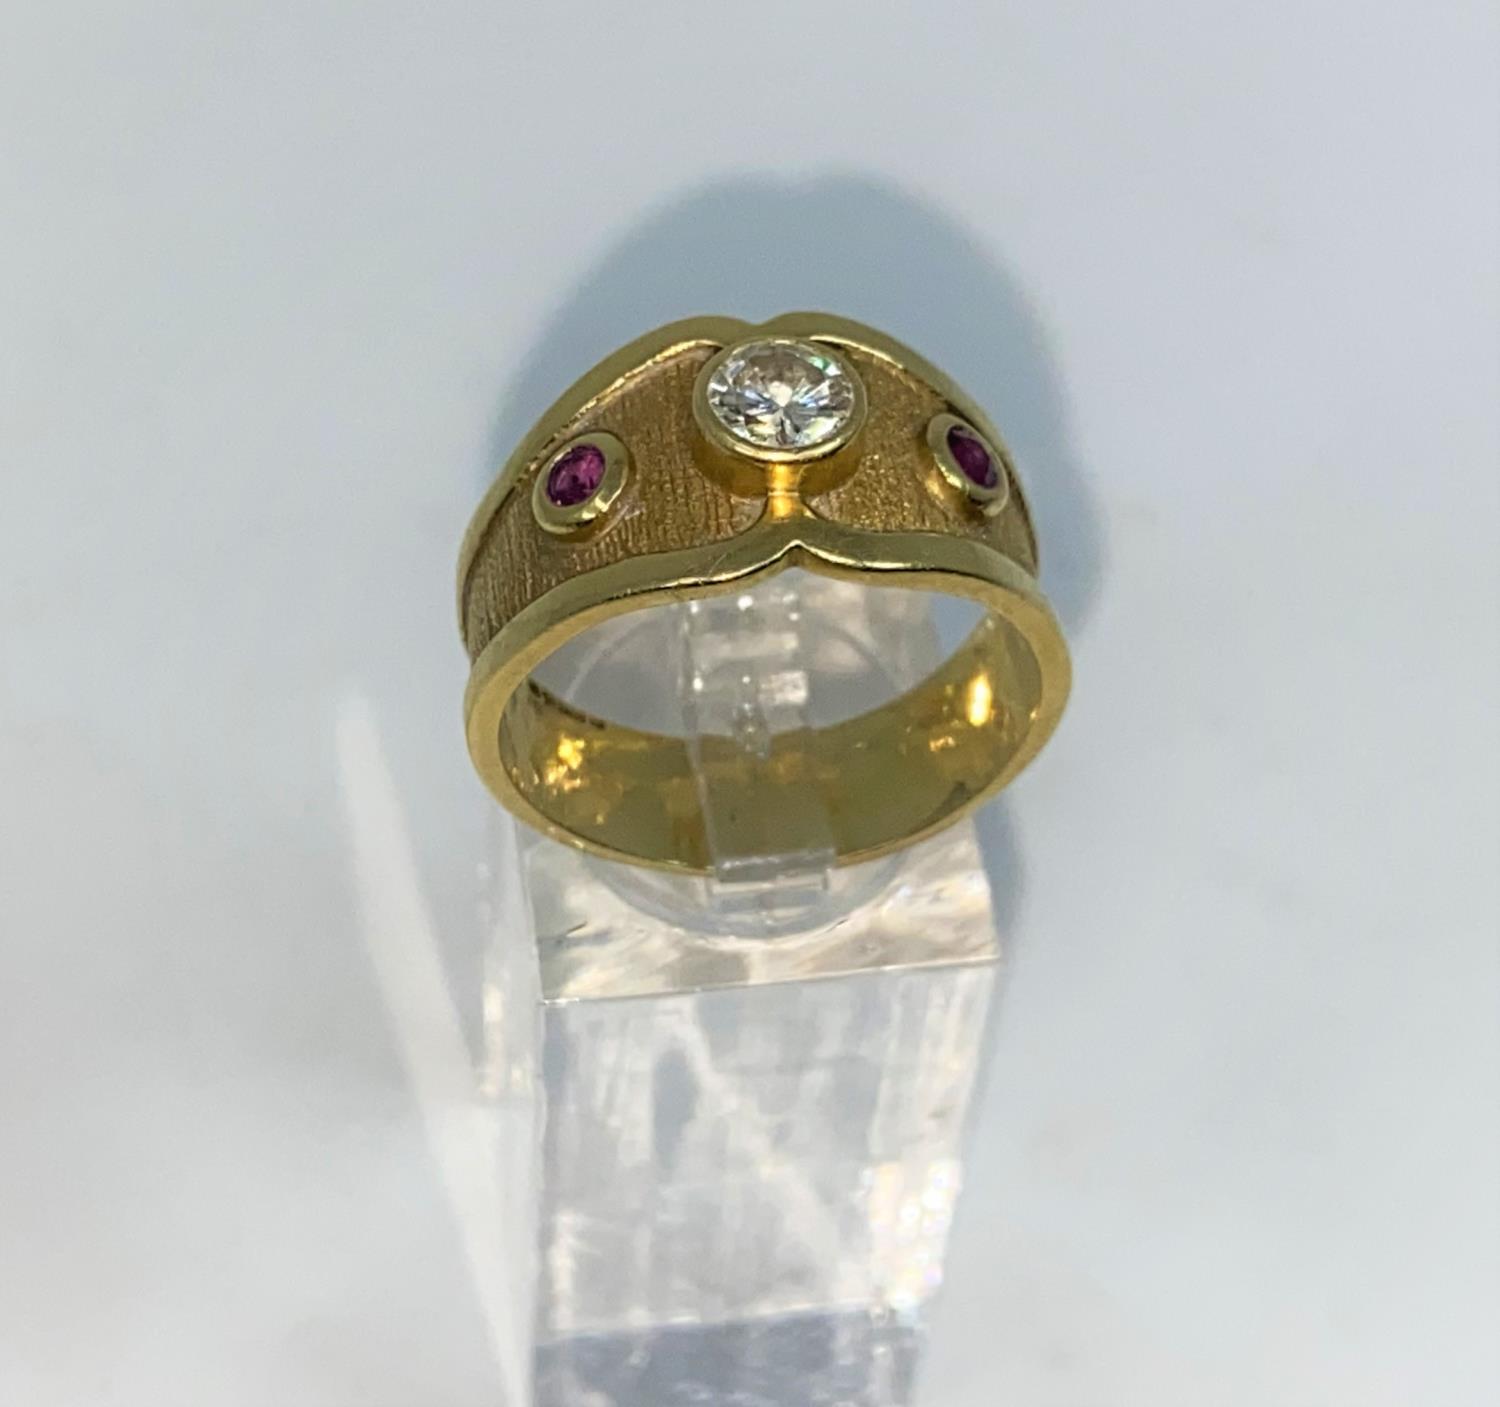 A Victorian style 18 carat hallmarked gold ring with wide shaped shank set with 2 rubied and a - Image 2 of 2